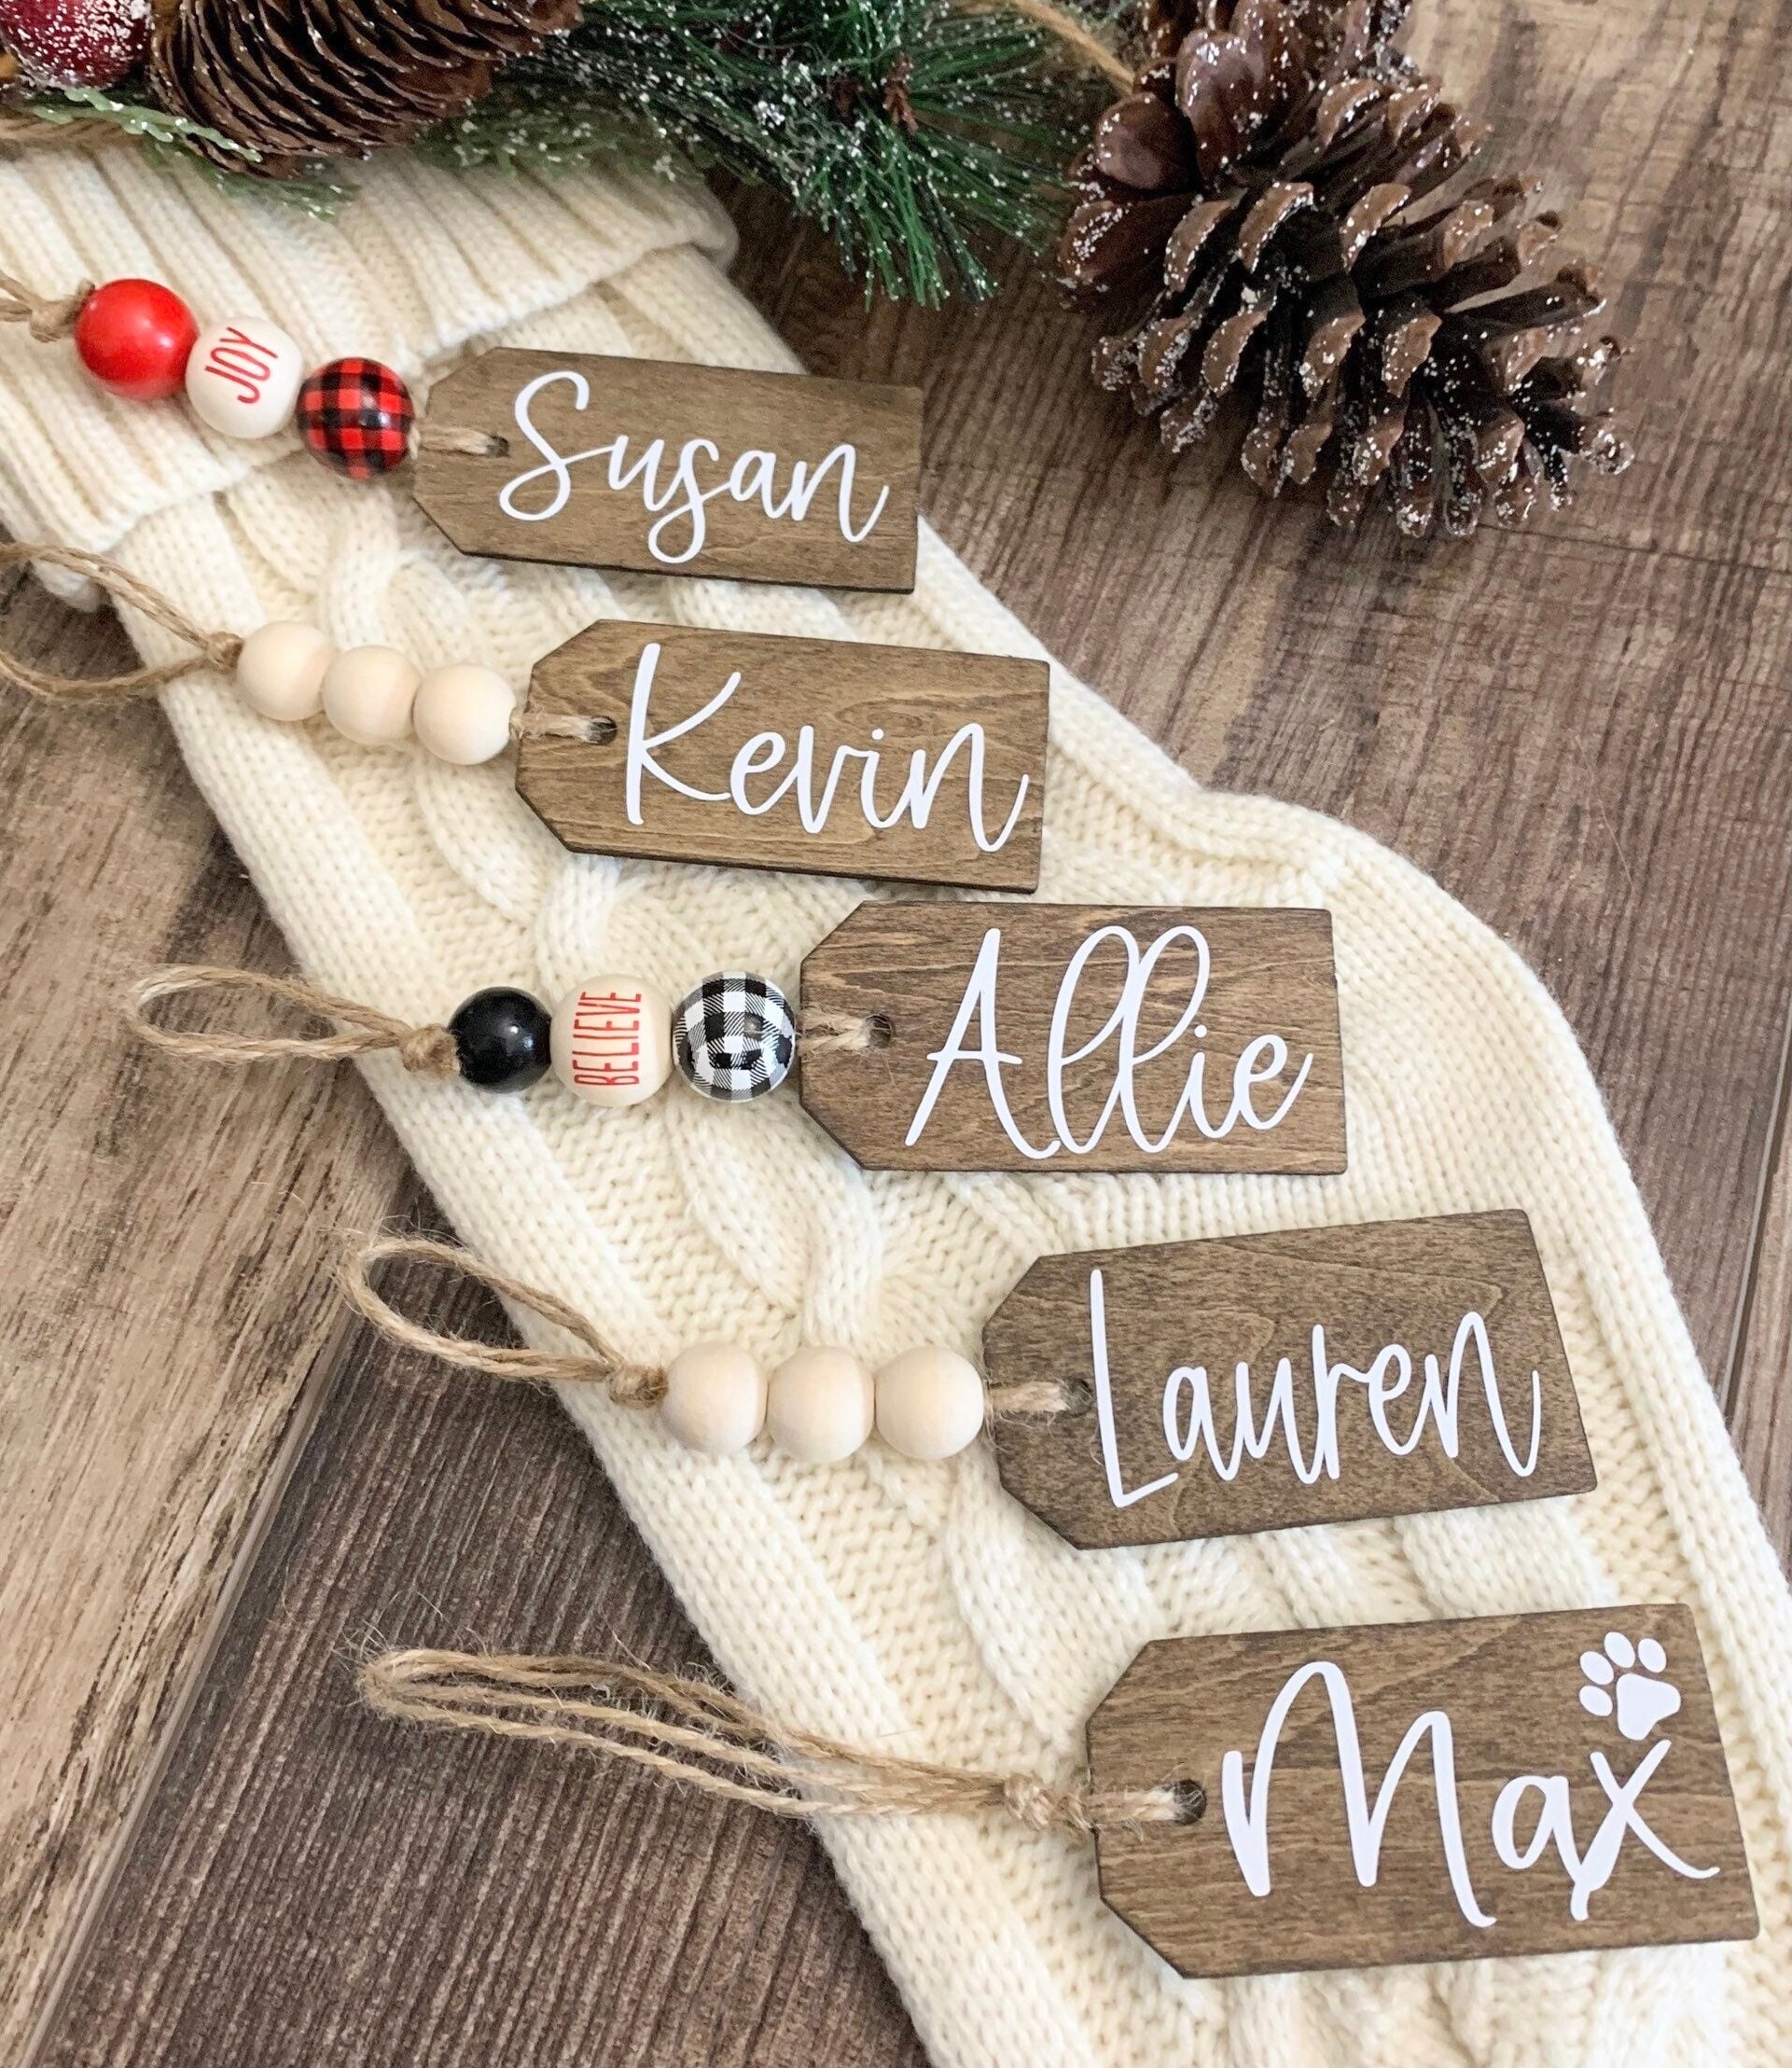 Personalized Christmas Stocking Tags Wooden Name Tag Beaded